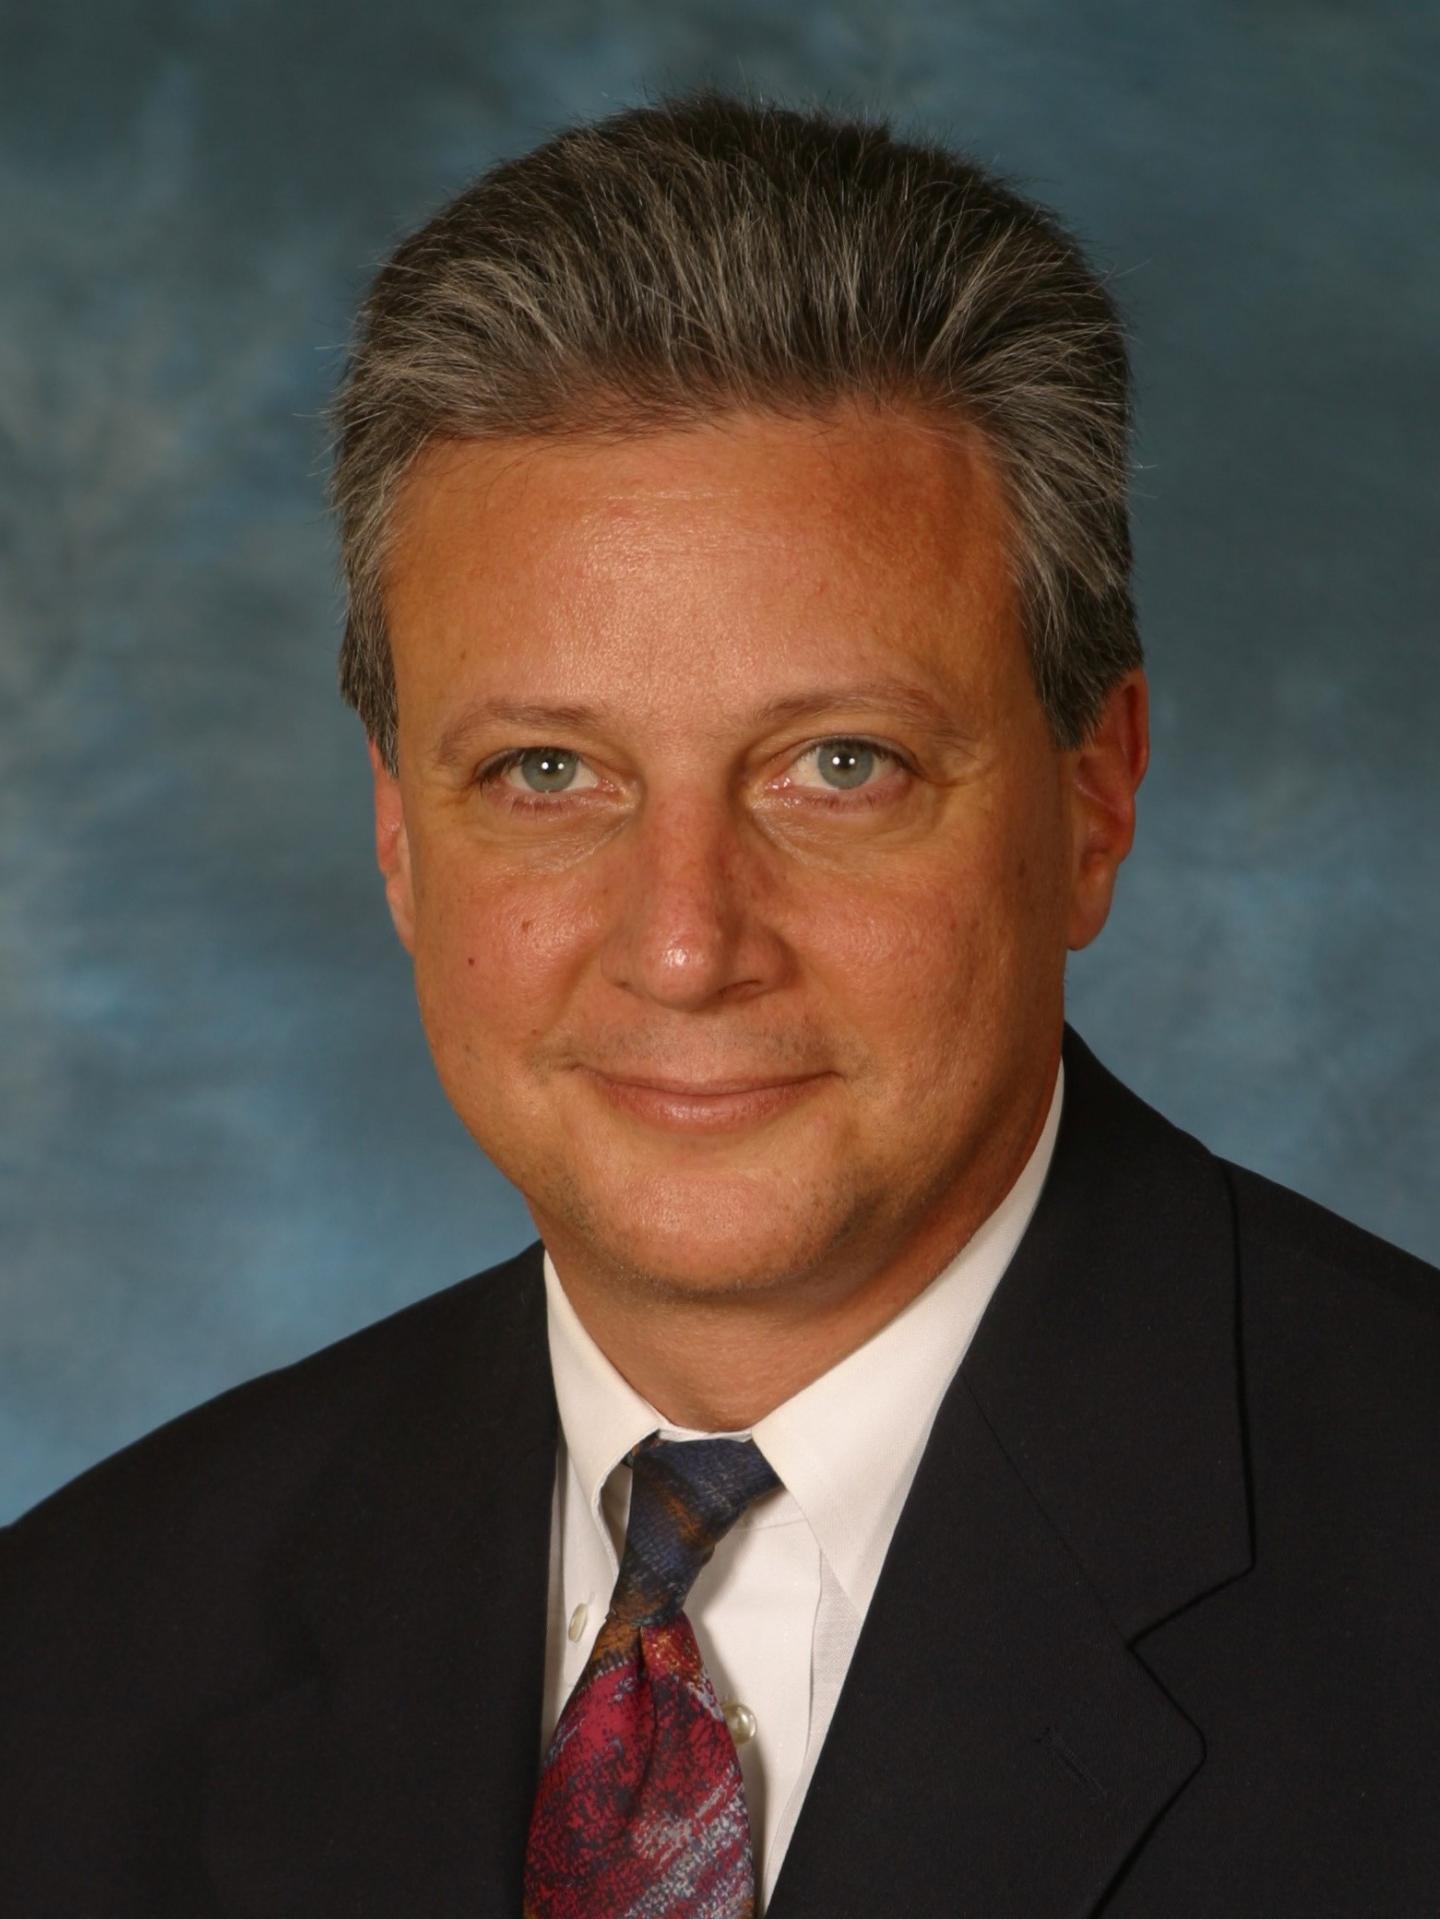 Peter S. Conti, MD, PhD